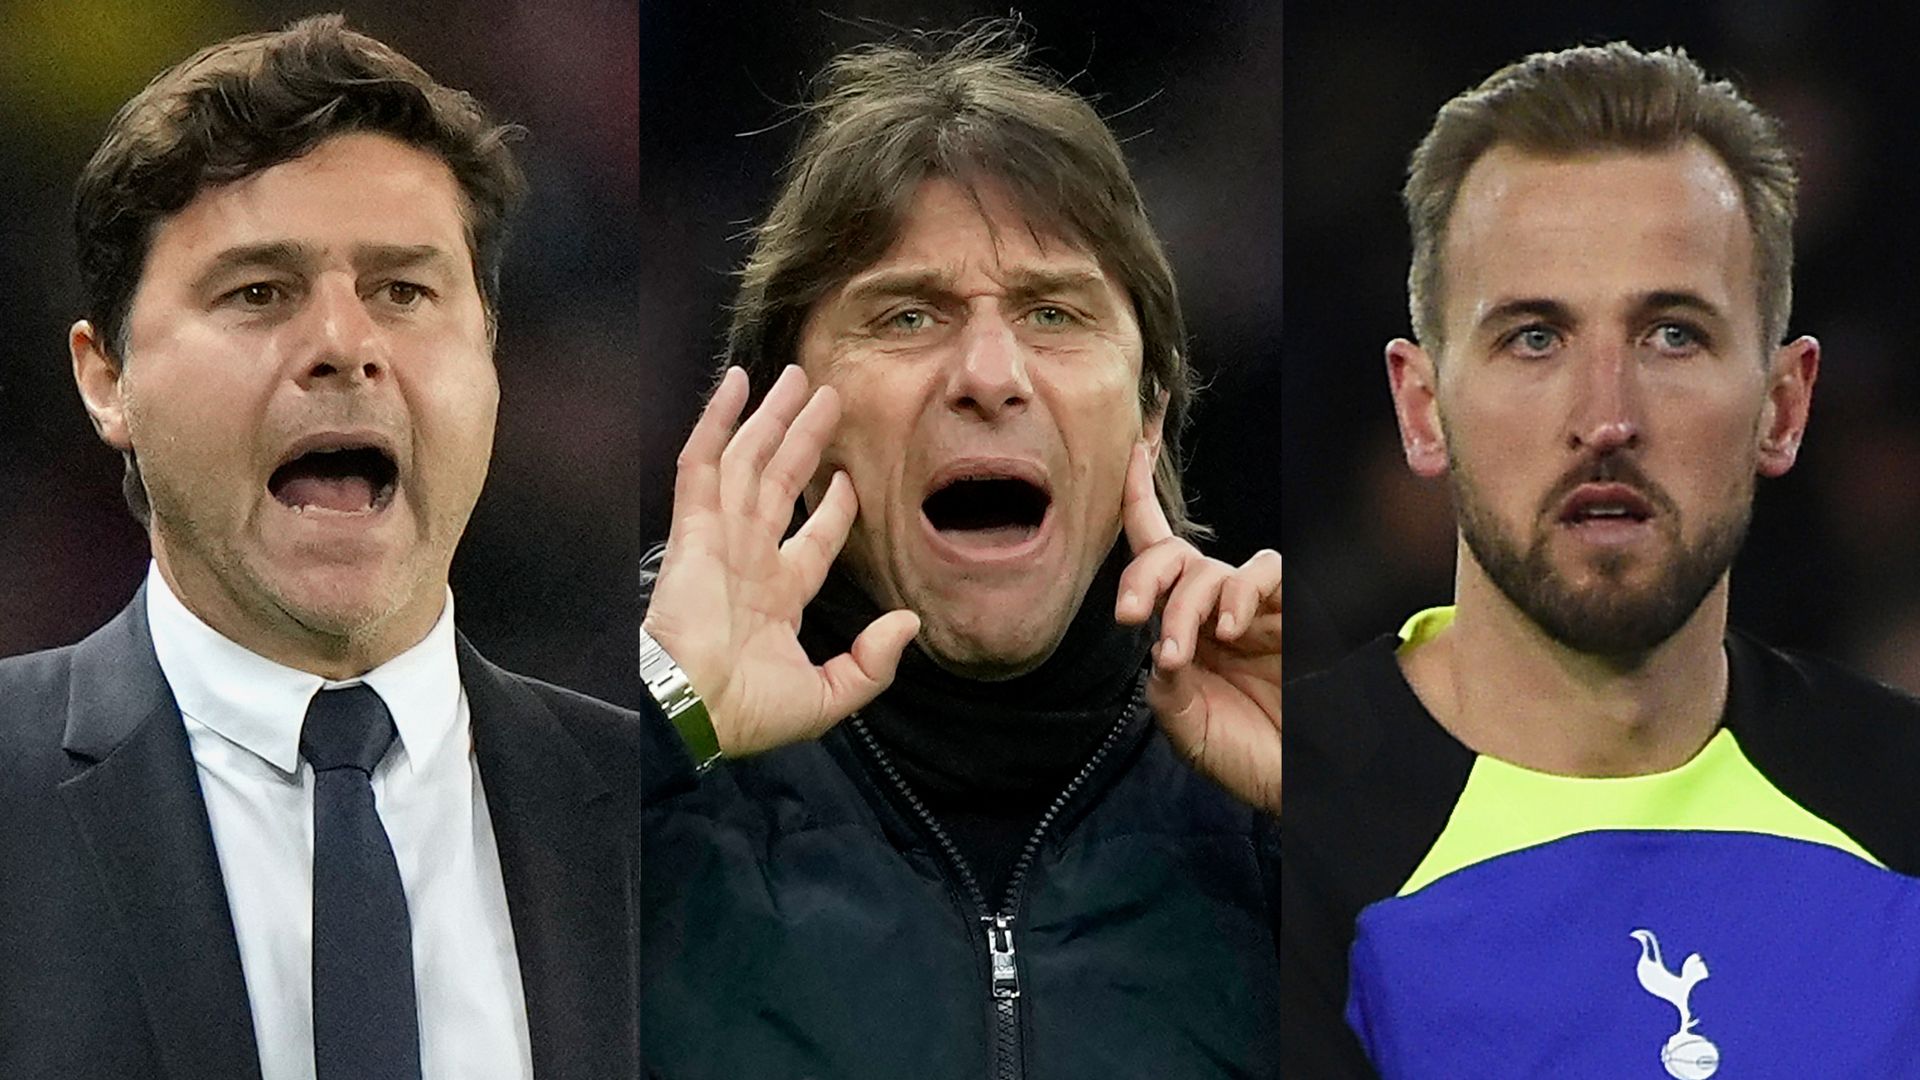 Inside the Spurs camp after Conte's outburst - and what's next...